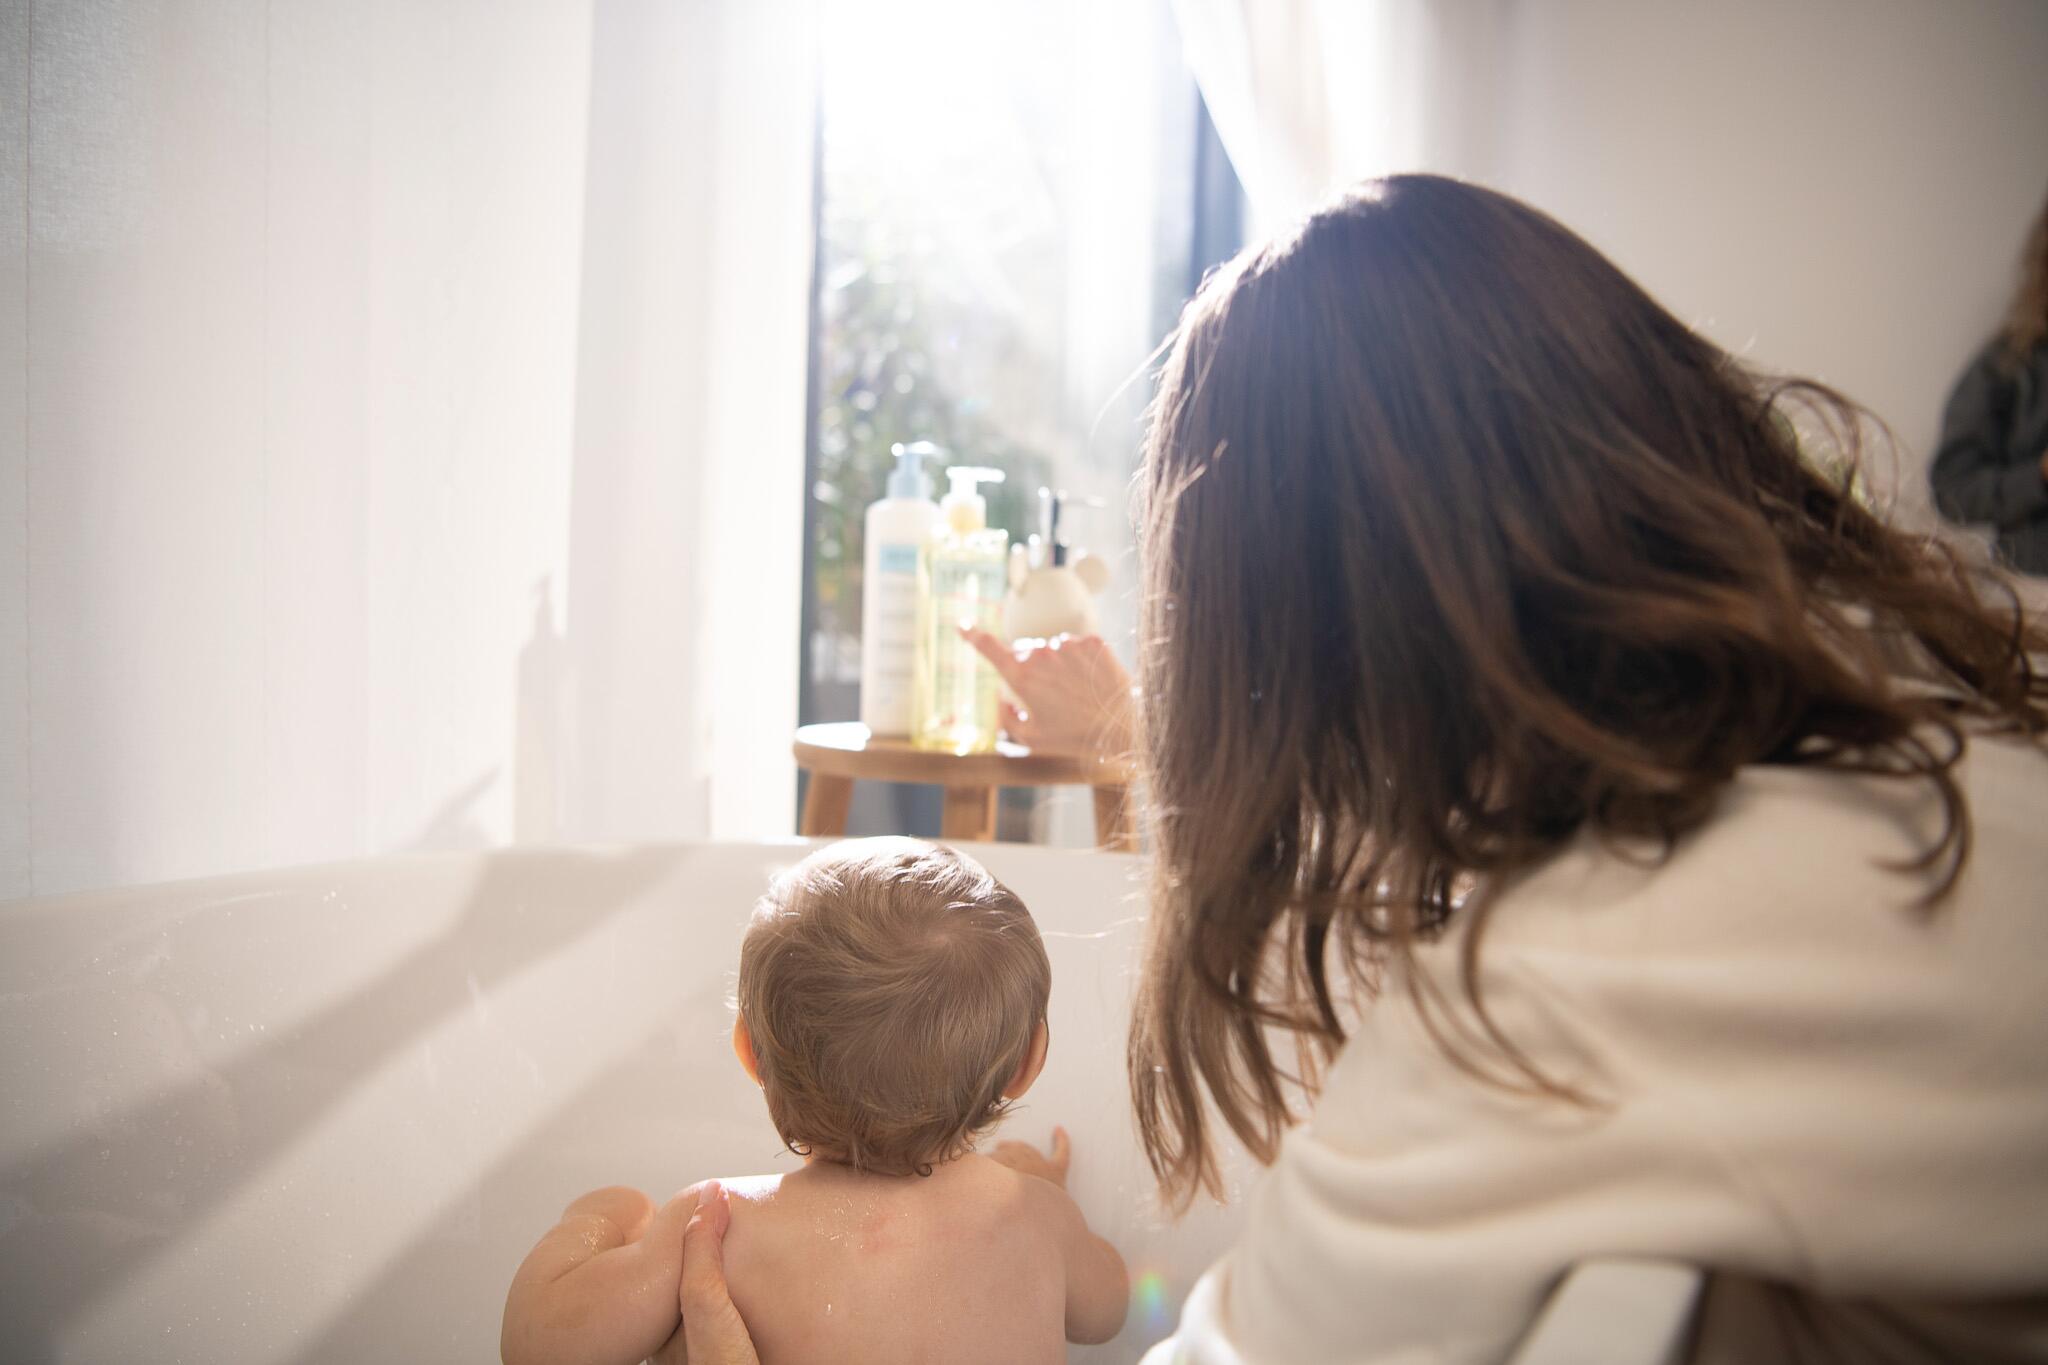 Mum and baby in the bath looking at the bottles of Dexeryl Emollient Cream and Cleansing Oil